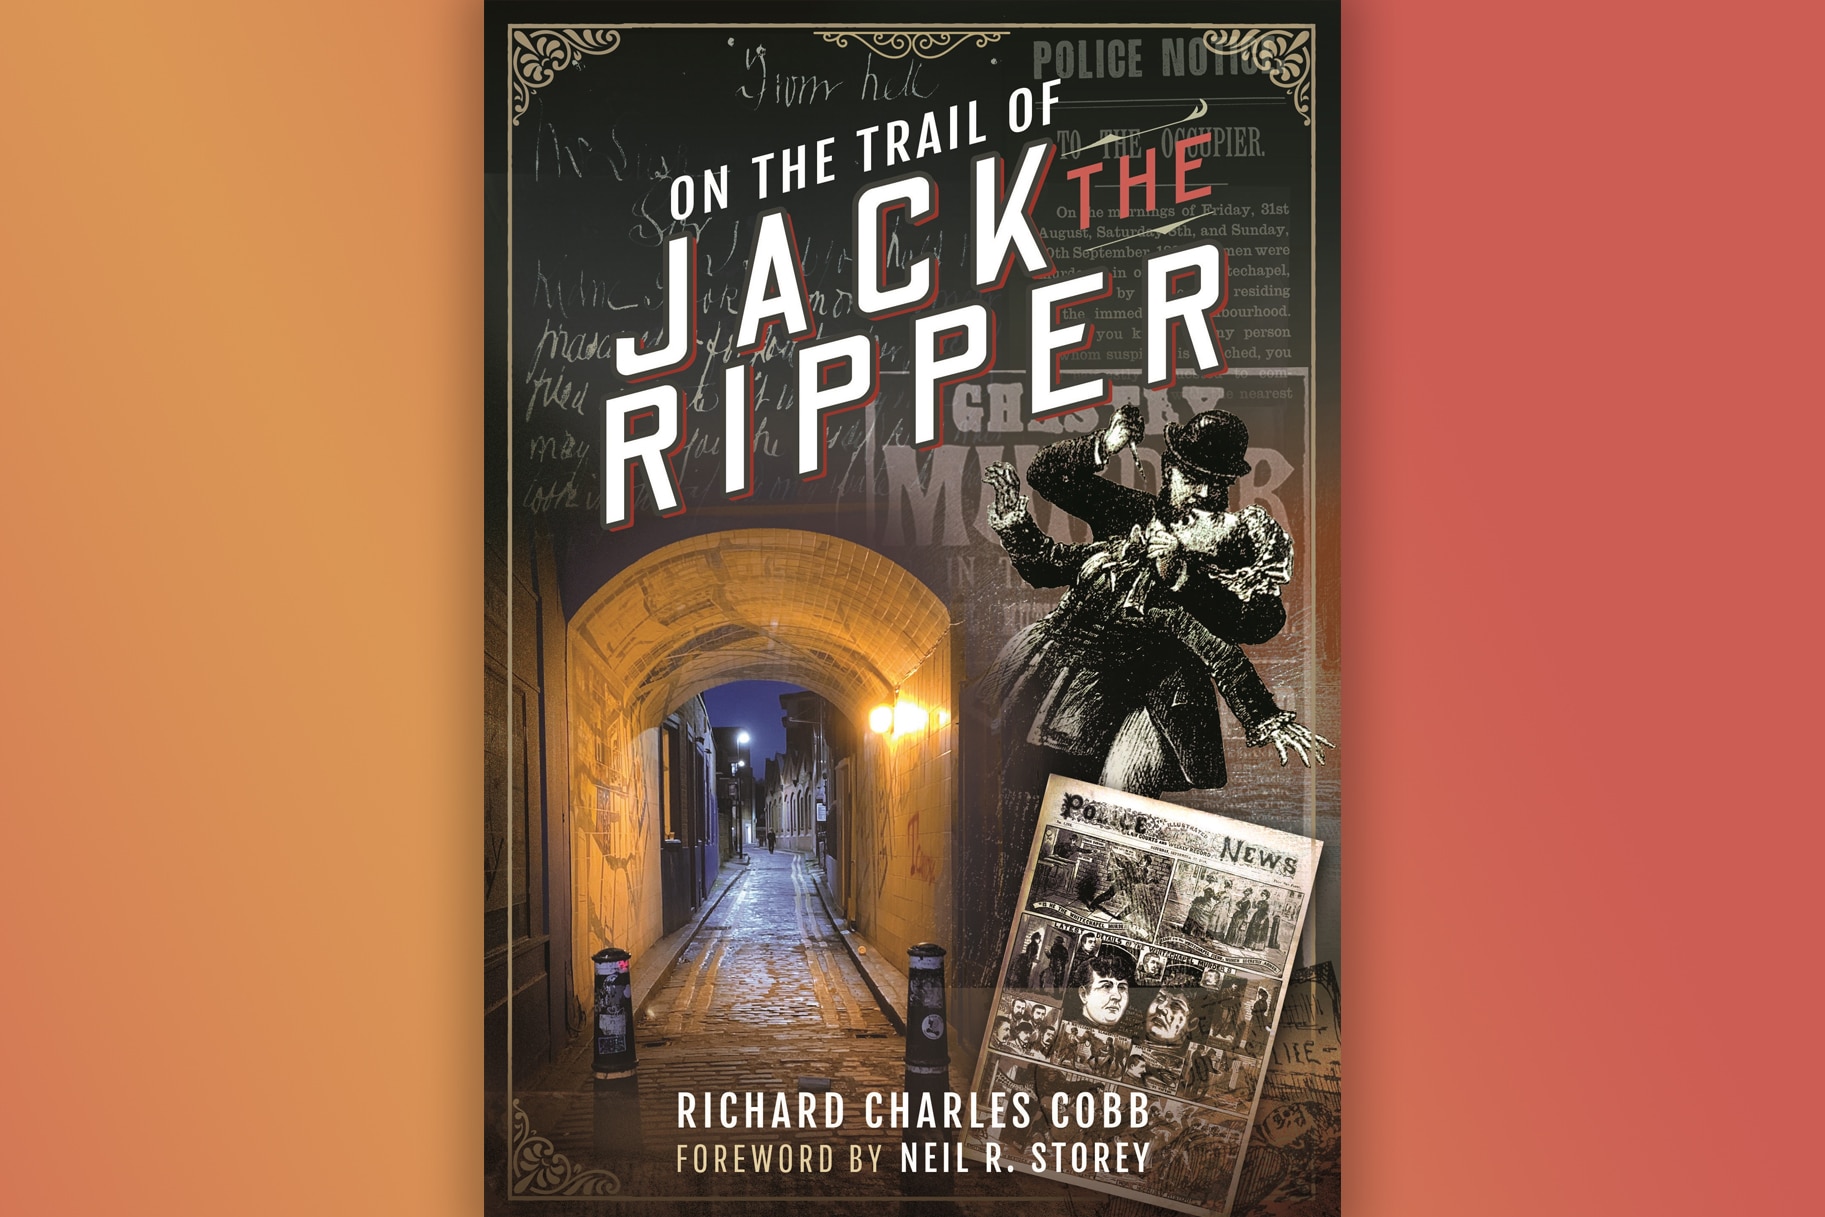 On The Trail Of Jack The Ripper by Richard Charles Cobb